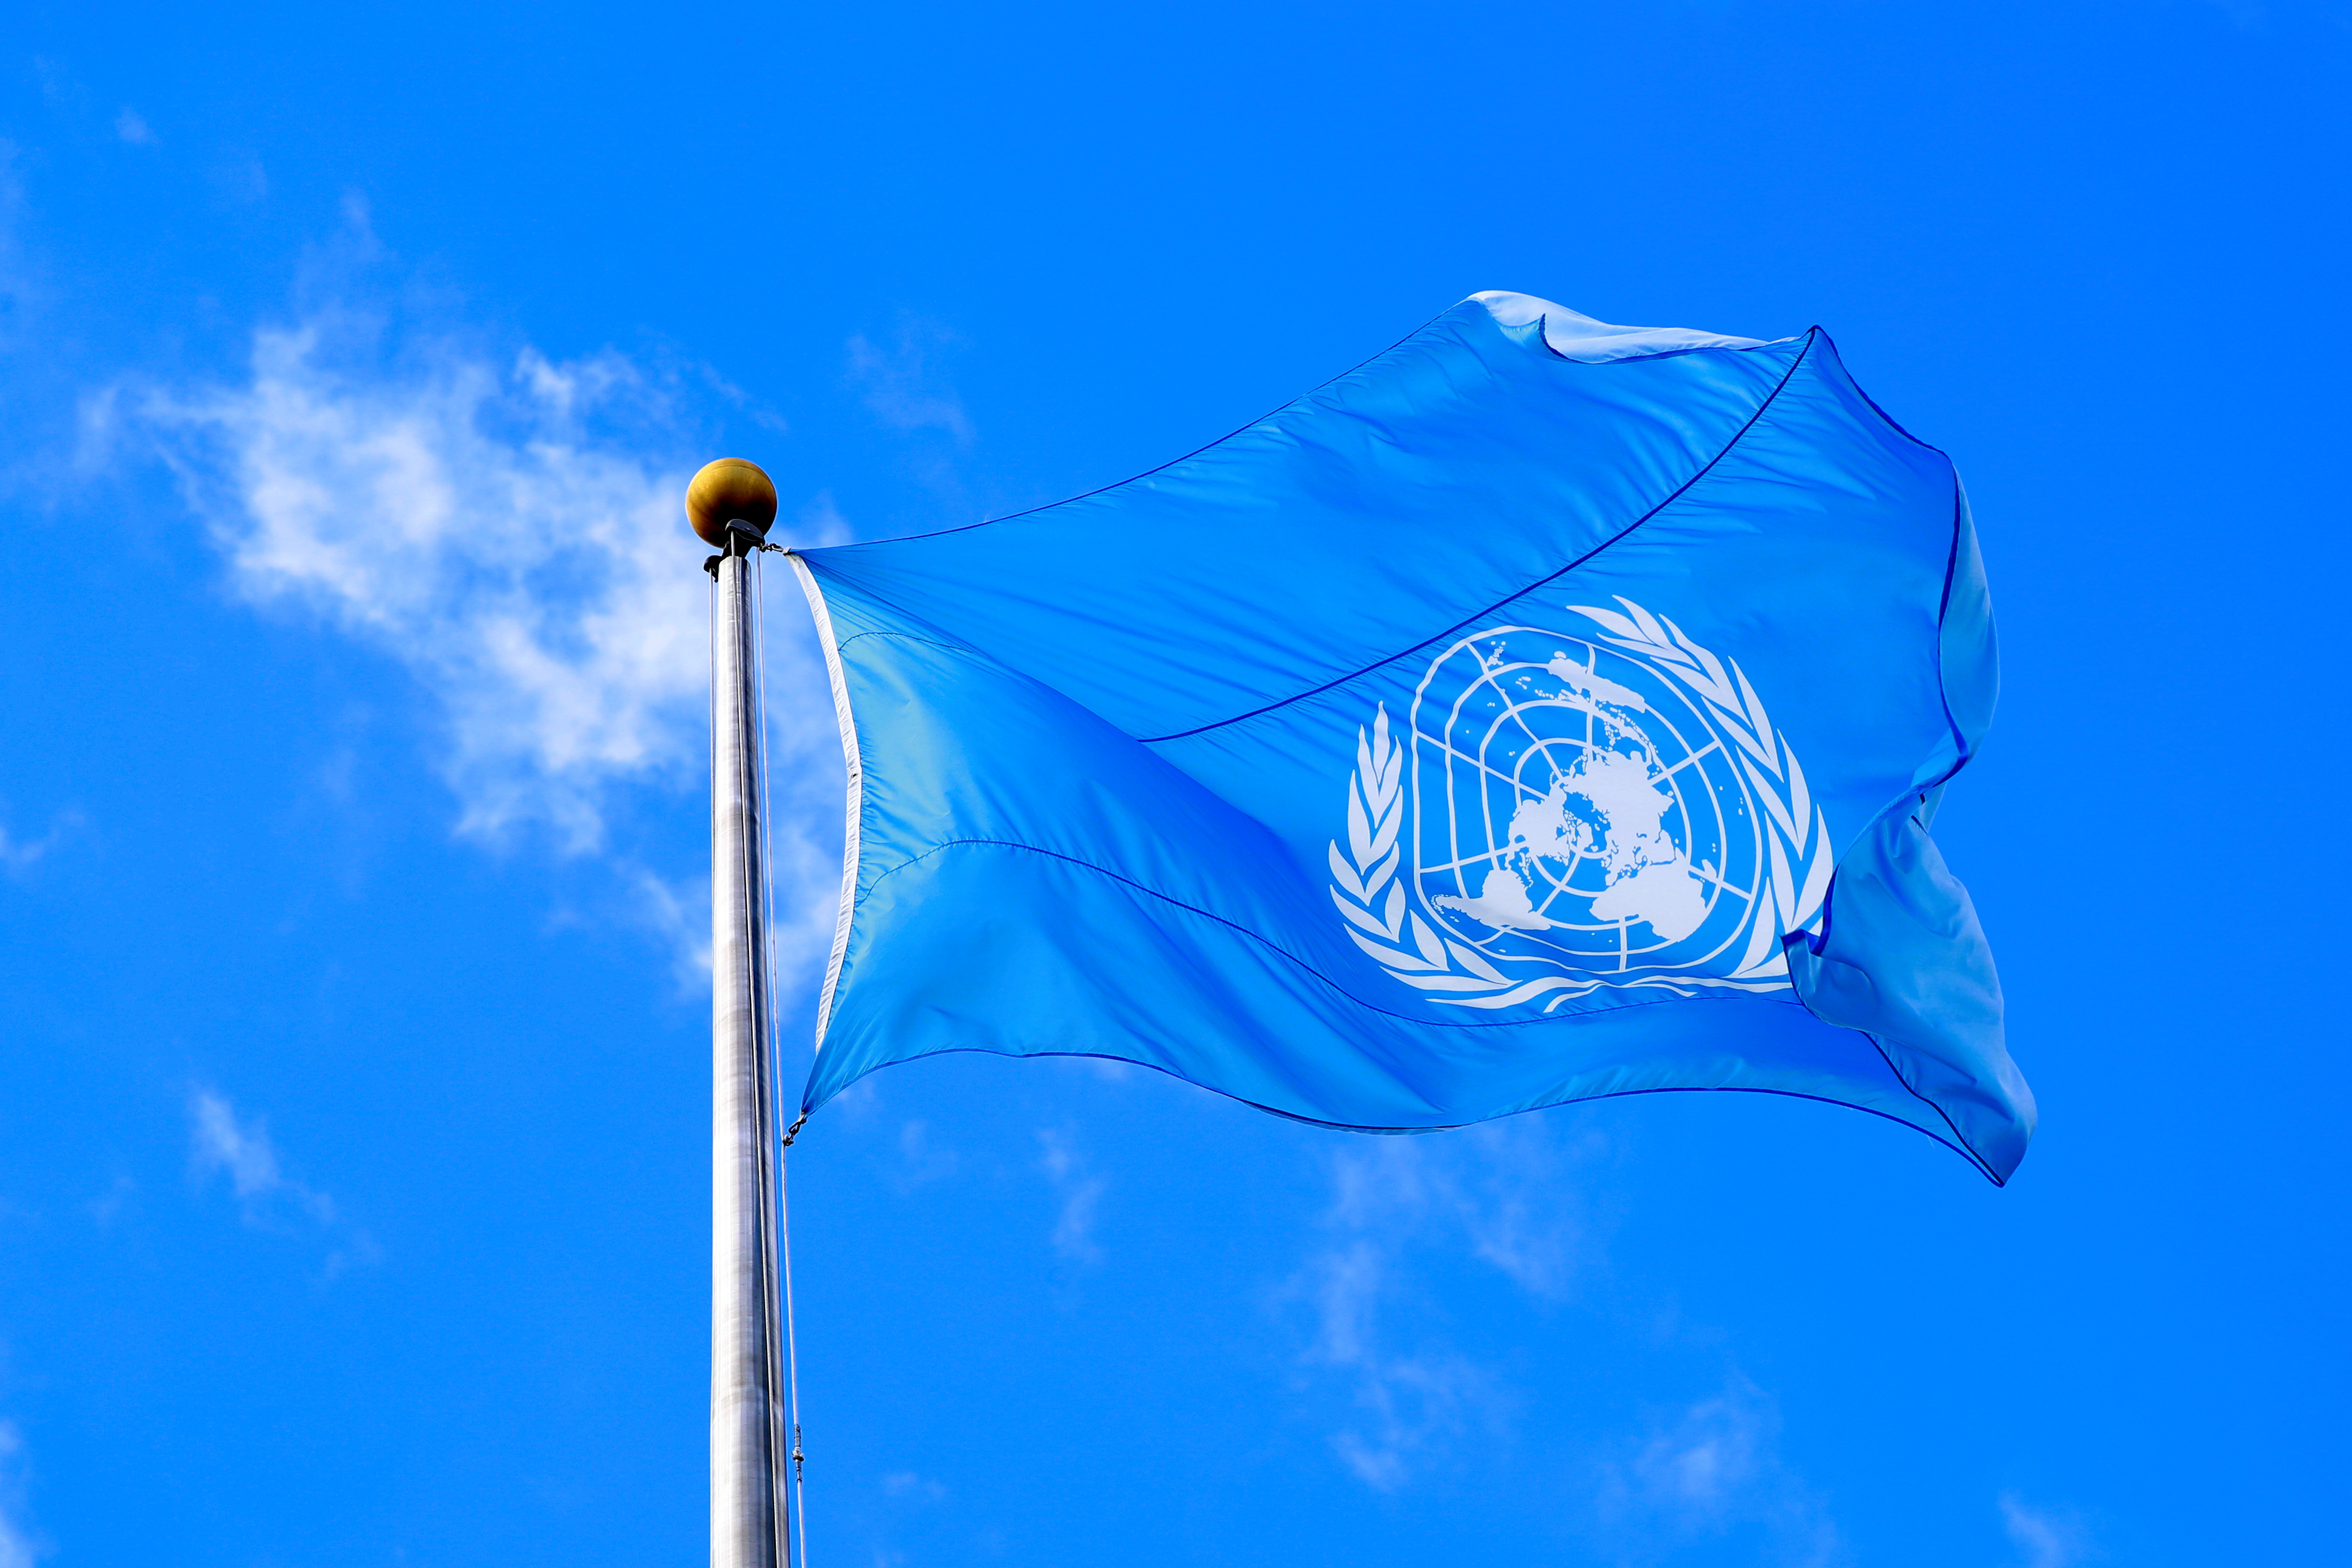 The United Nations flag is seen during the 74th session of the United Nations General Assembly at U.N. headquarters in New York City, New York, U.S.